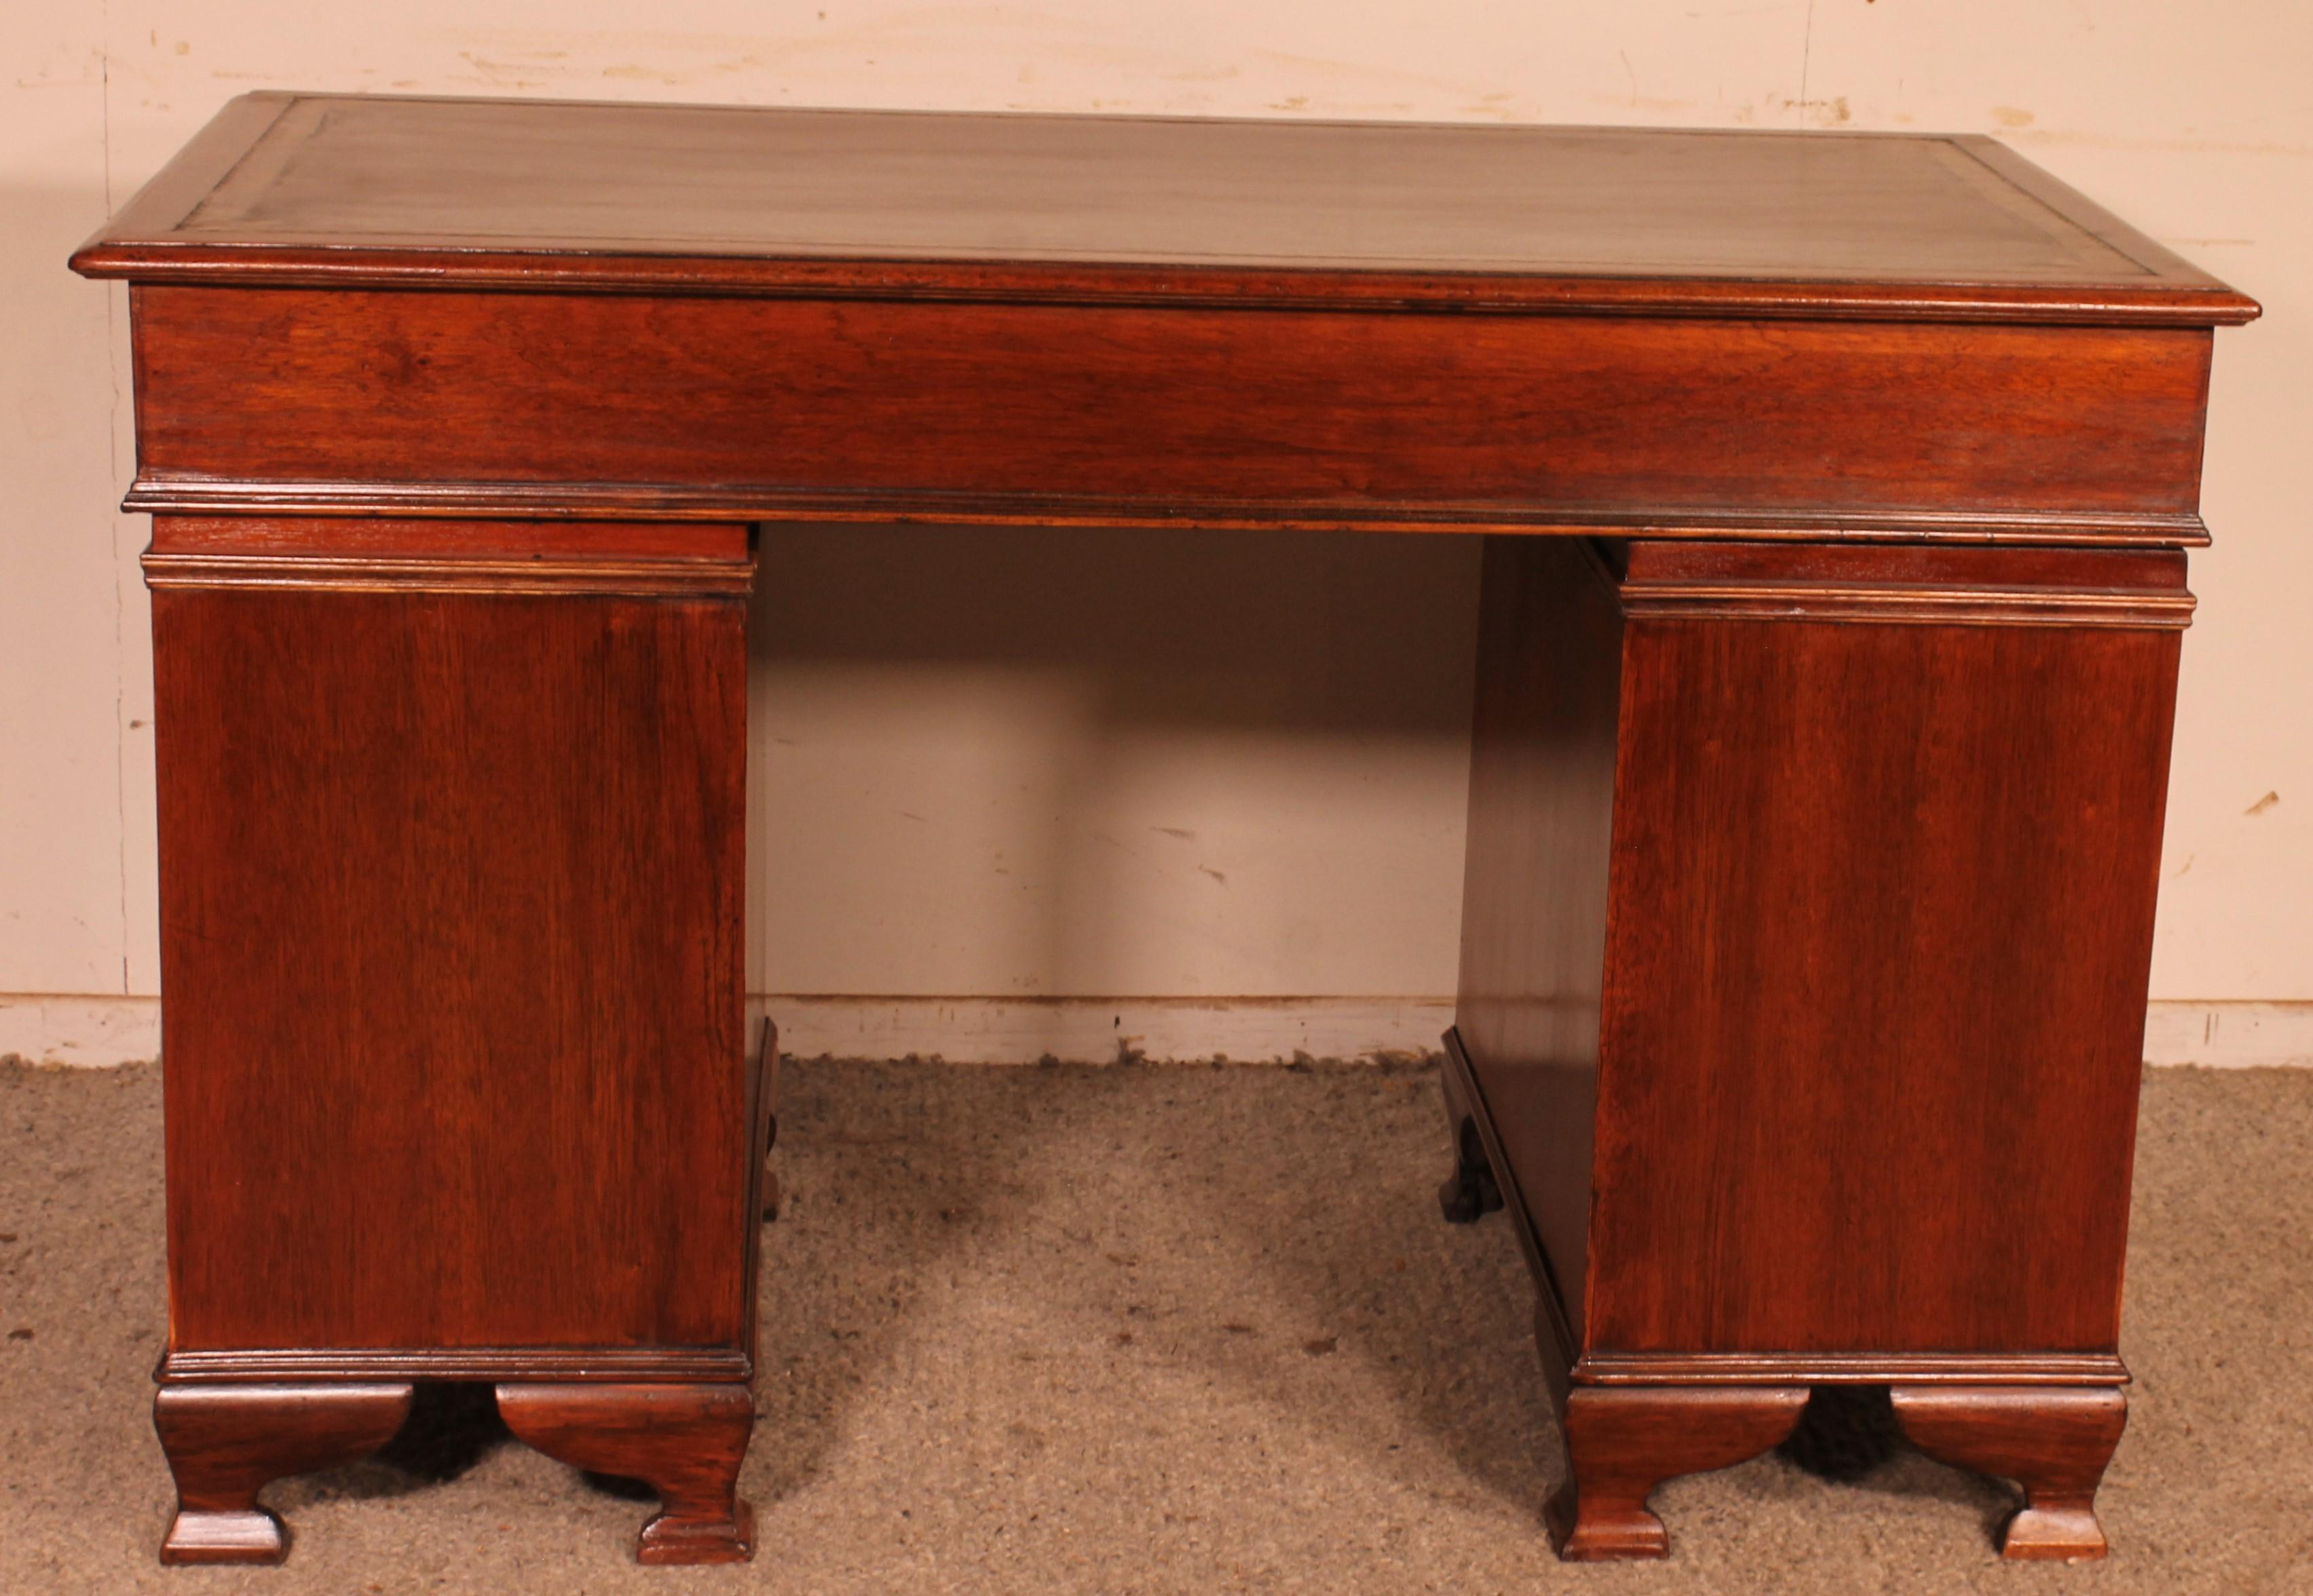 19th Century Small Mahogany Pedestal Desk From The 19 ° Century For Sale